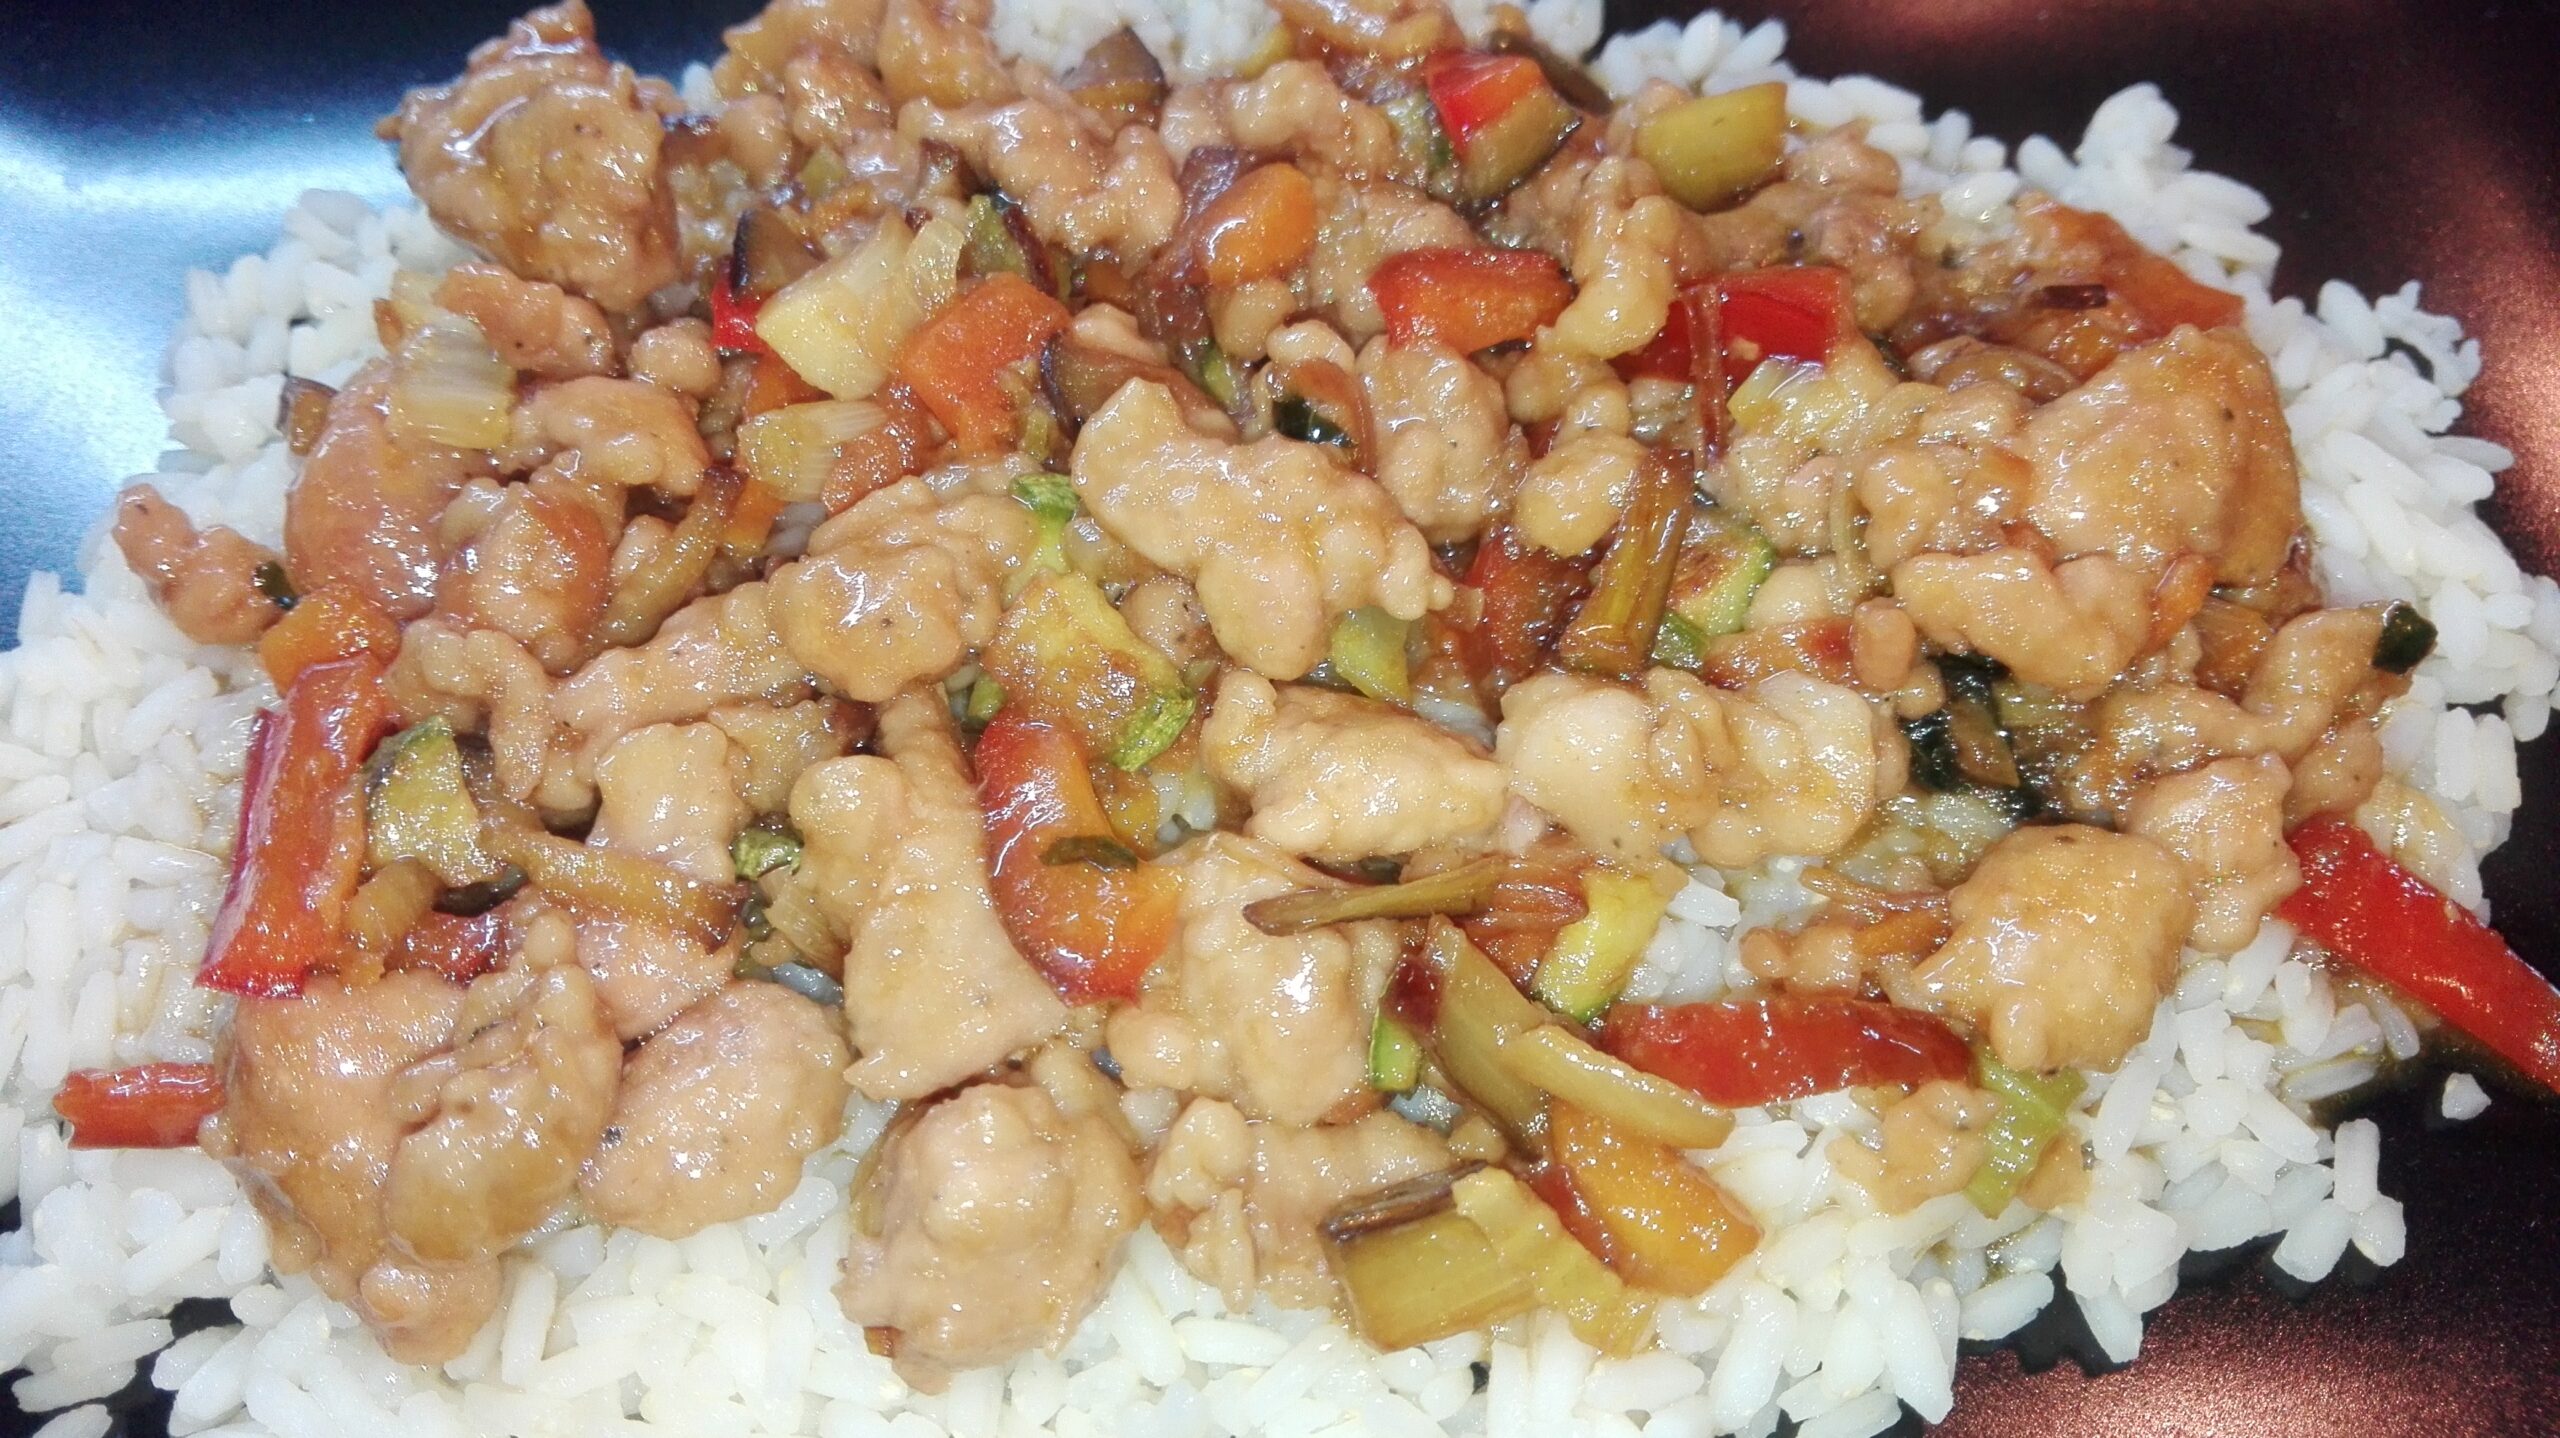 pork with sweet and sour vegetables on pilaff rice